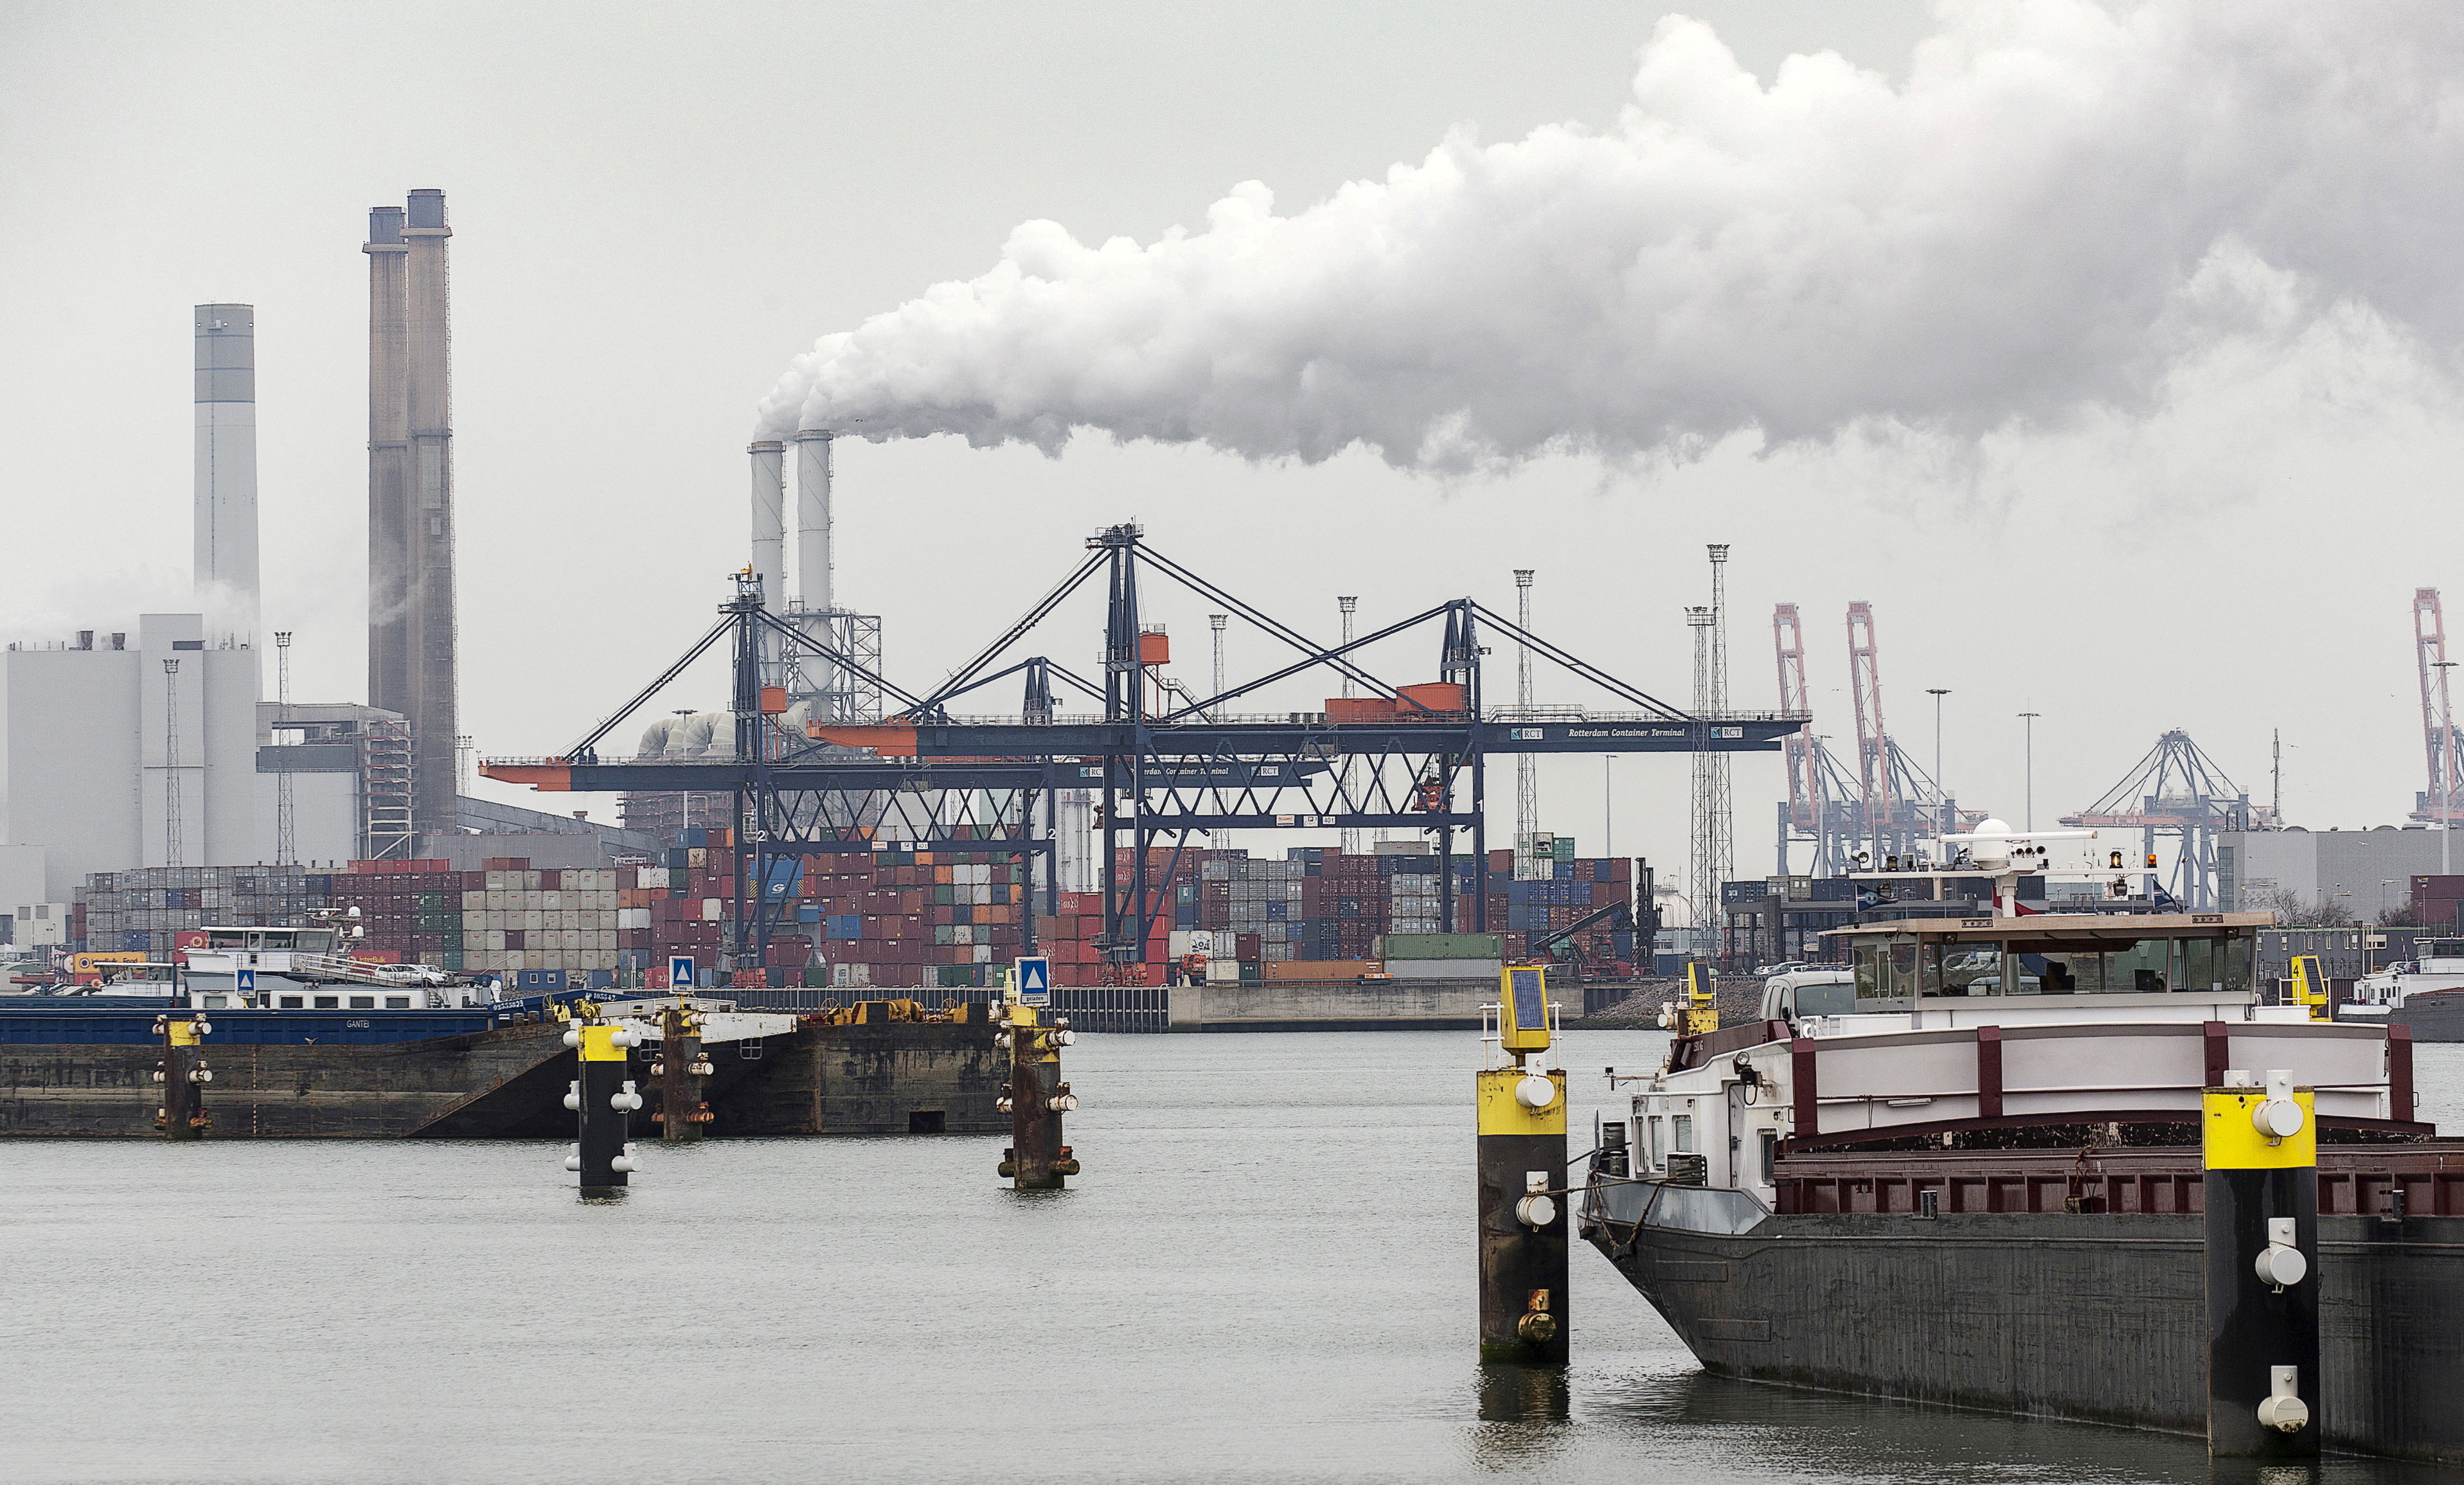 View of a container terminal in the port of Rotterdam, the Netherlands